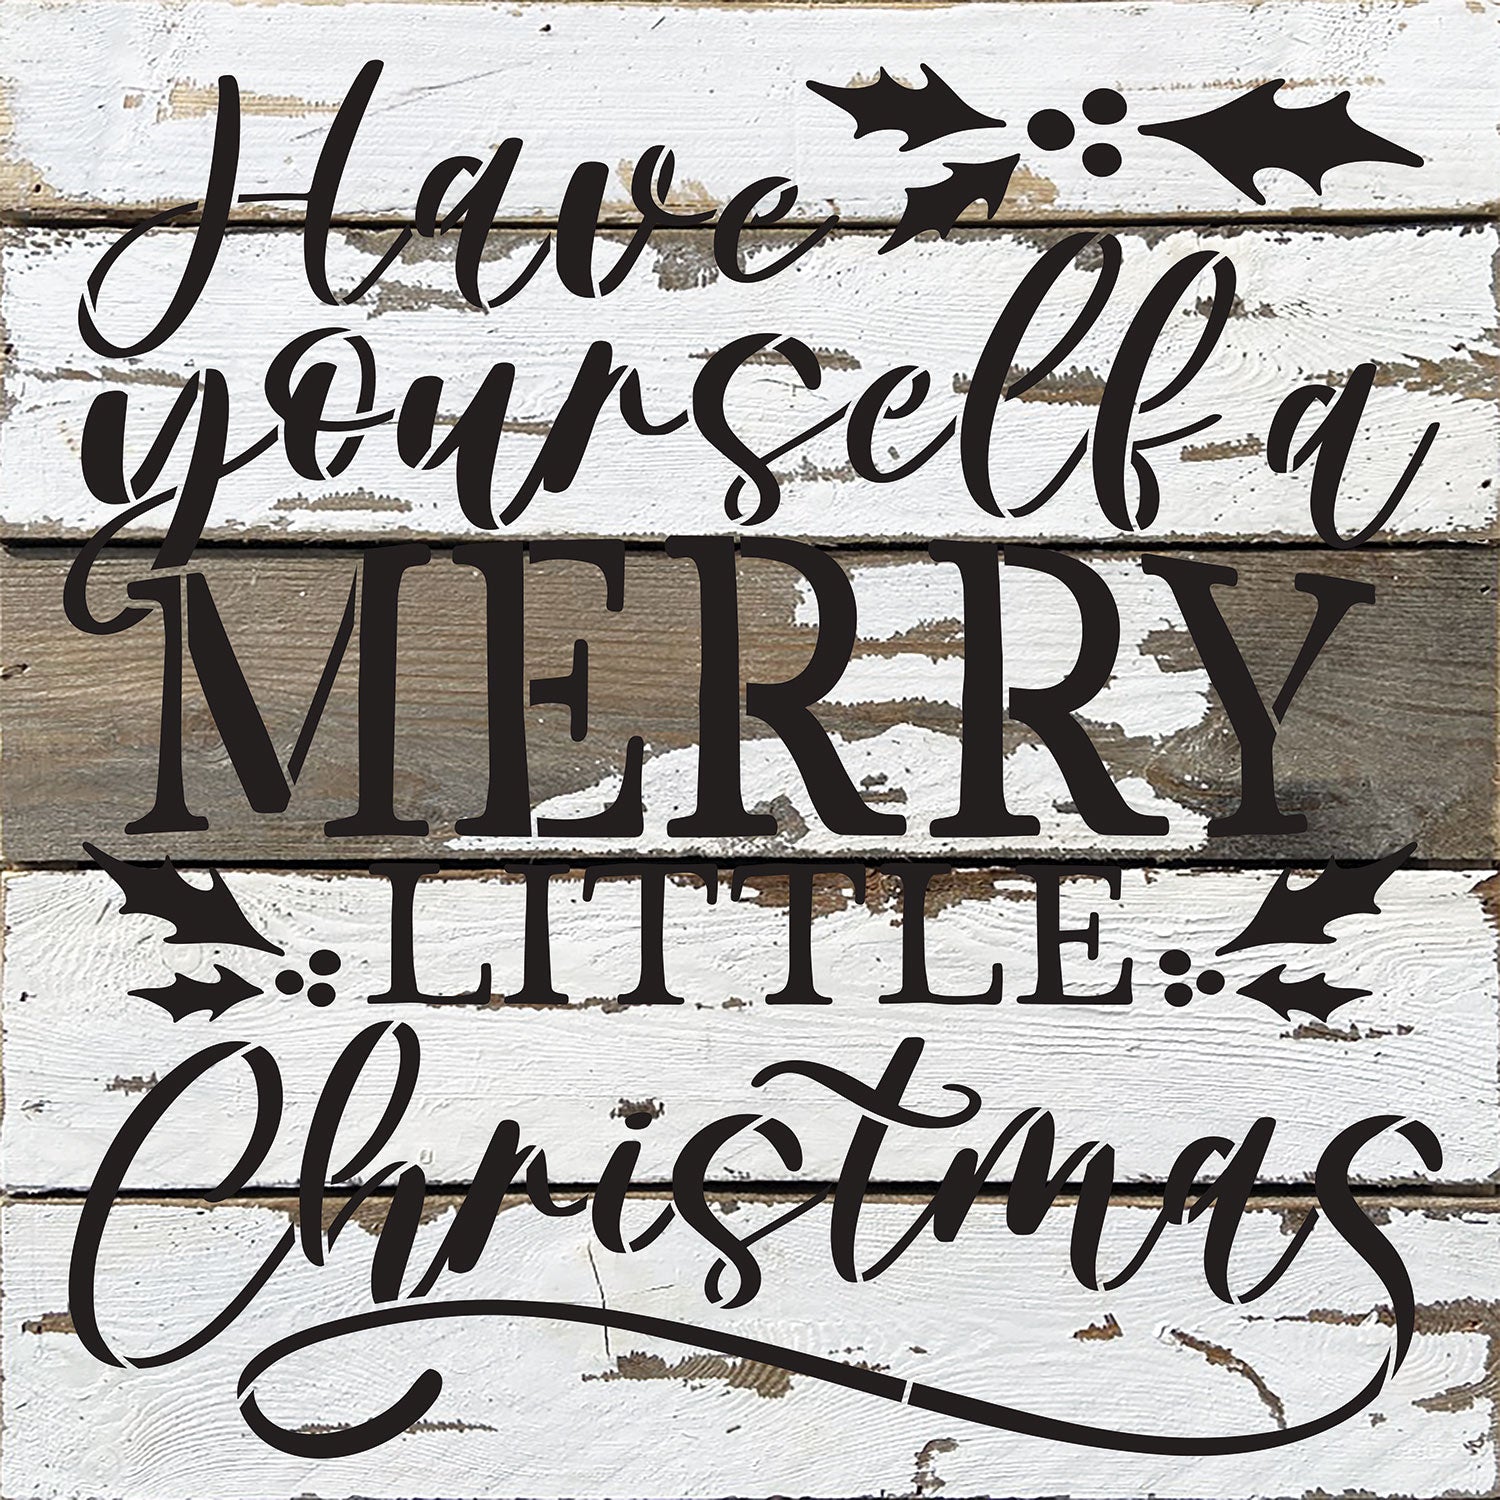 Have yourself a Merry Little Christmas / 14x14 Reclaimed Wood Wall Decor